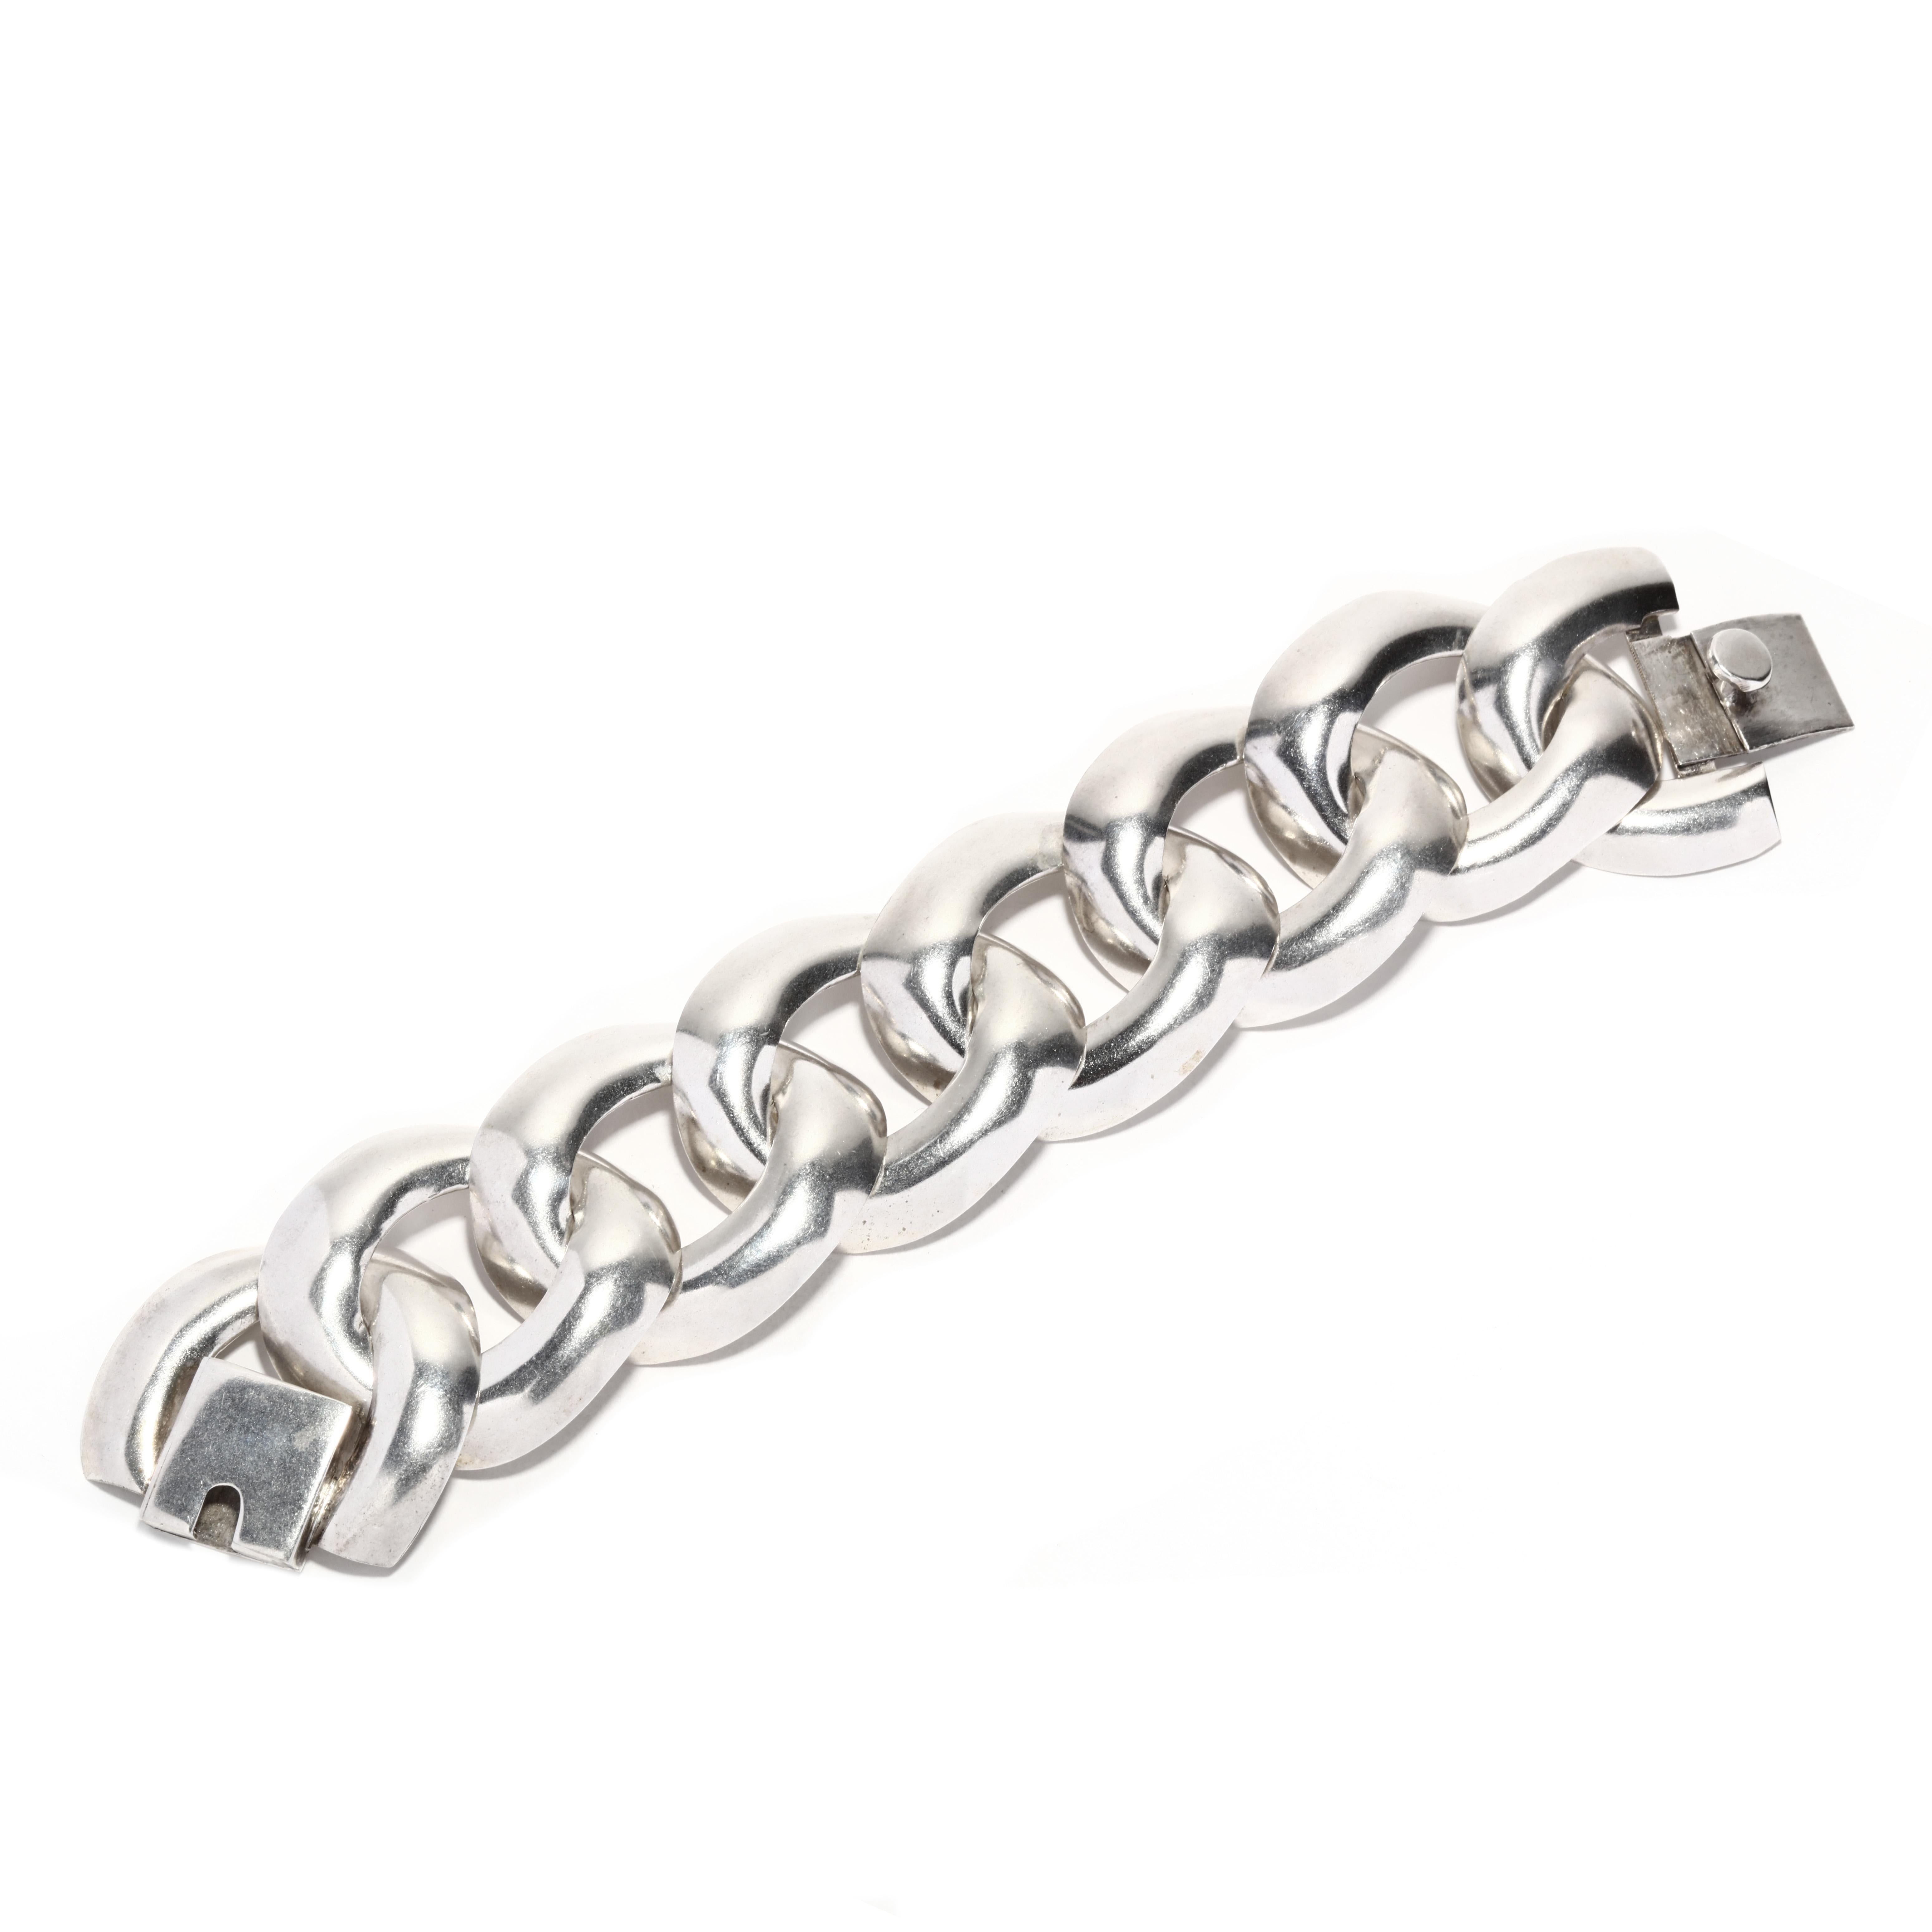 This vintage Mexican wide chain link bracelet demonstrates the unique style of Mexican silver craftsmanship. The sterling silver bracelet measures 7.5 inches in length and features a wide curb link design. This piece is a perfect addition to any